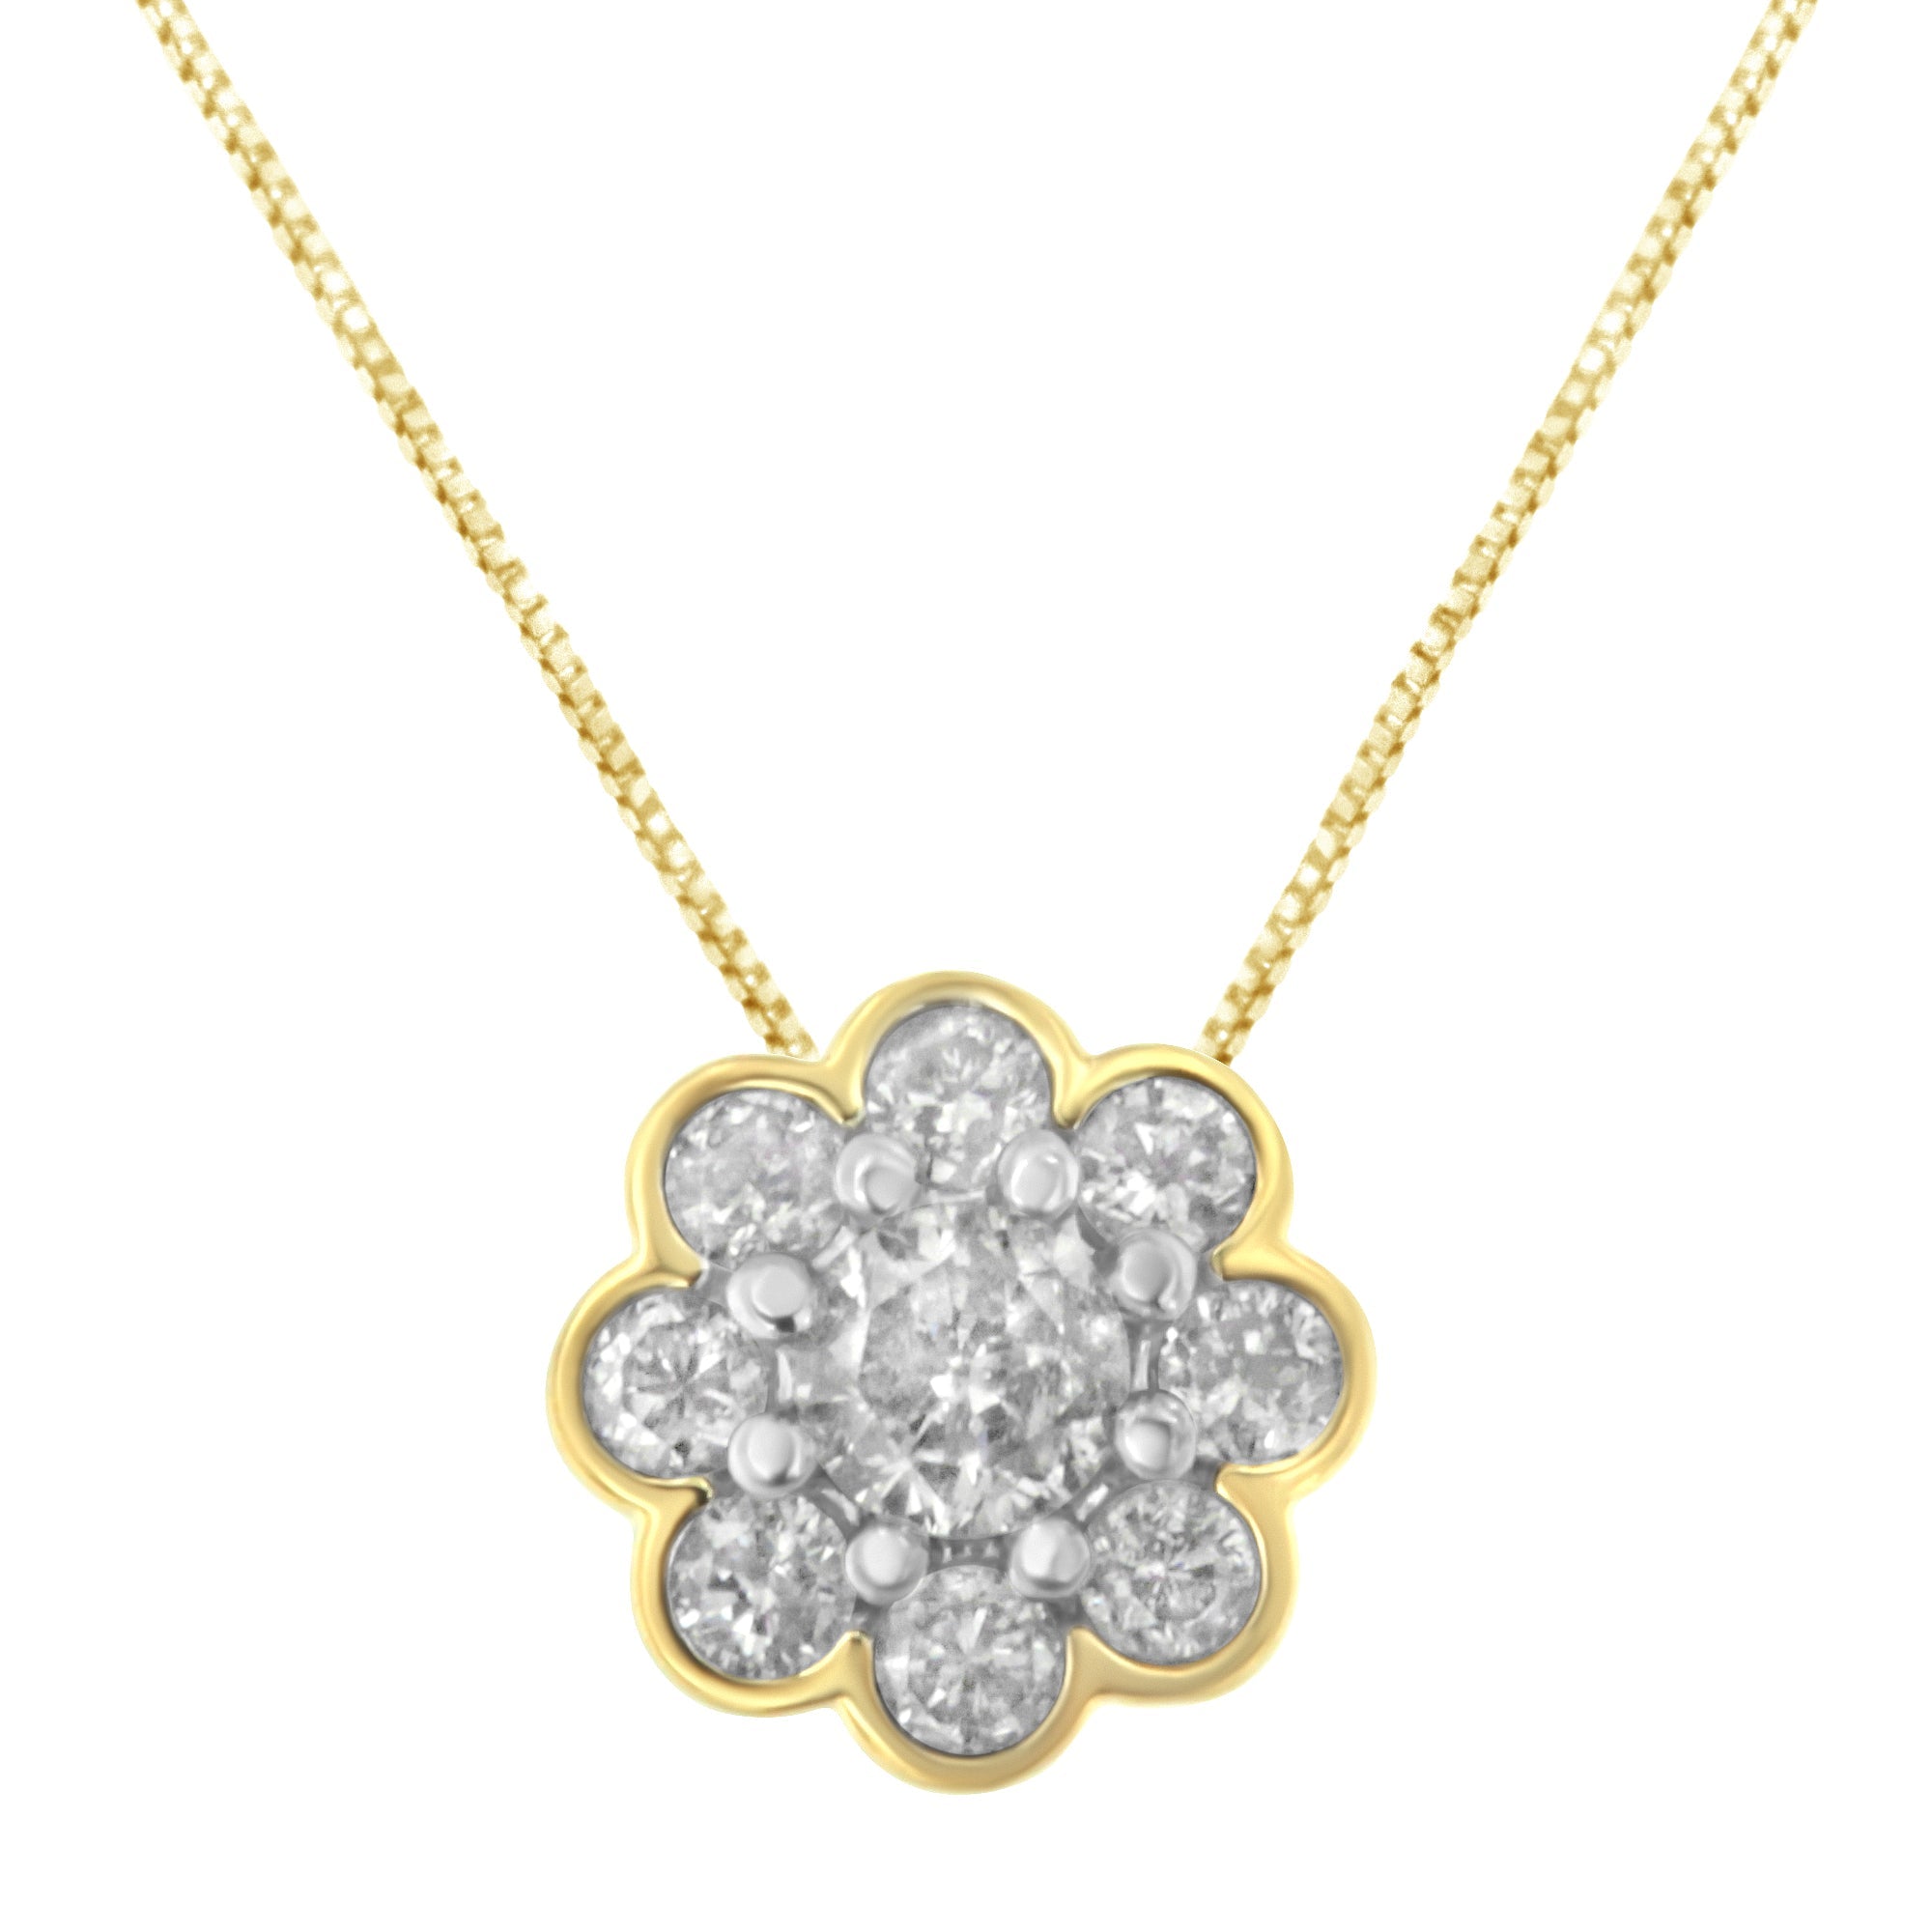 2 Micron 10K Yellow Gold plated .925 Sterling Silver 1/4 cttw Diamond Cluster Pendant Necklace (I-J, I2-I3) - LinkagejewelrydesignLinkagejewelrydesign